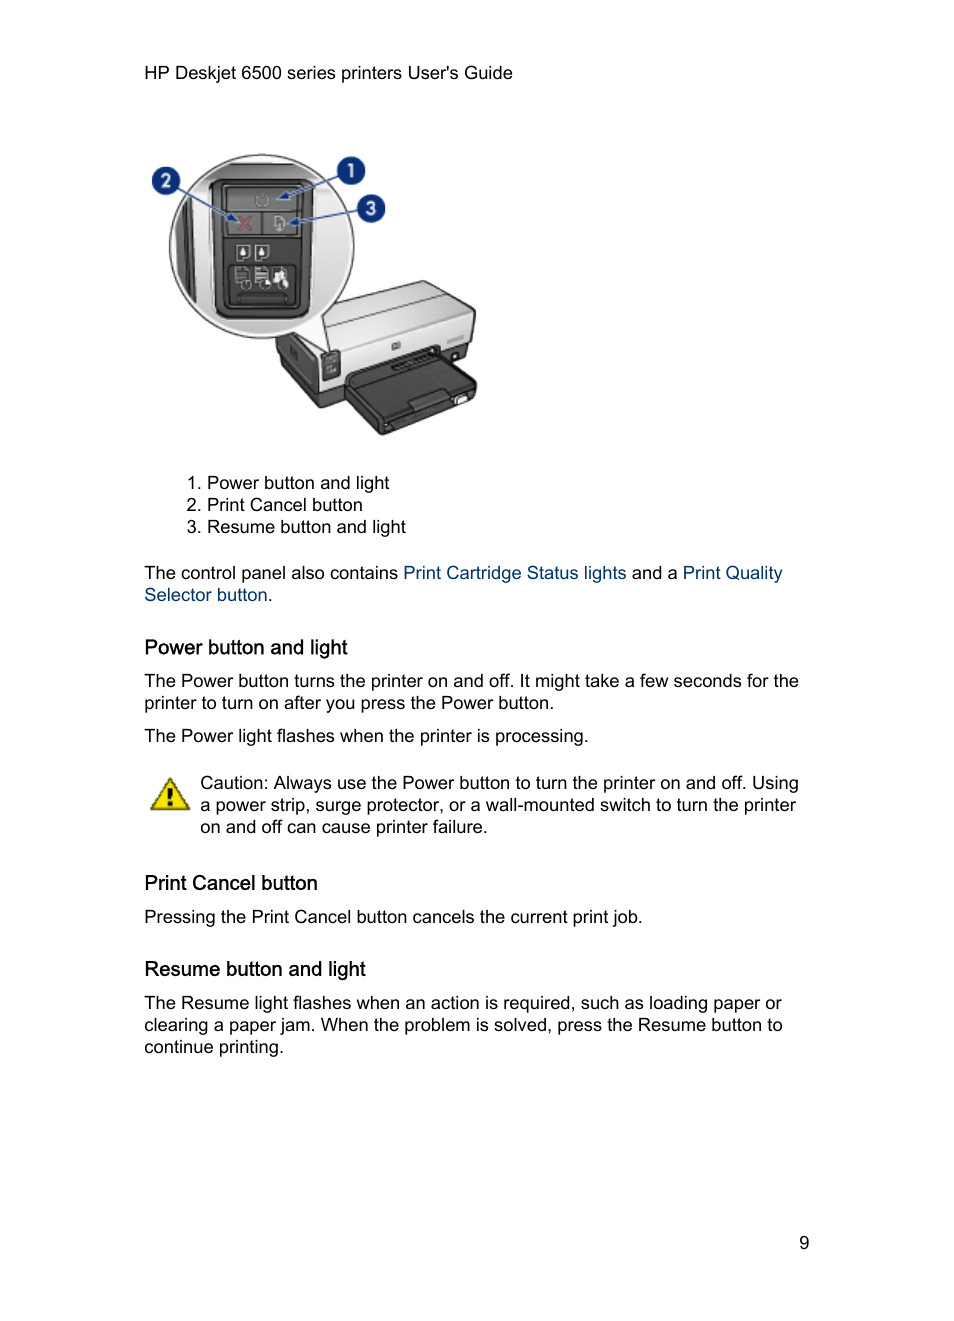 Power button and light, Print cancel button, Resume button and light | HP  Deskjet 6540 Color Inkjet Printer User Manual | Page 9 / 195